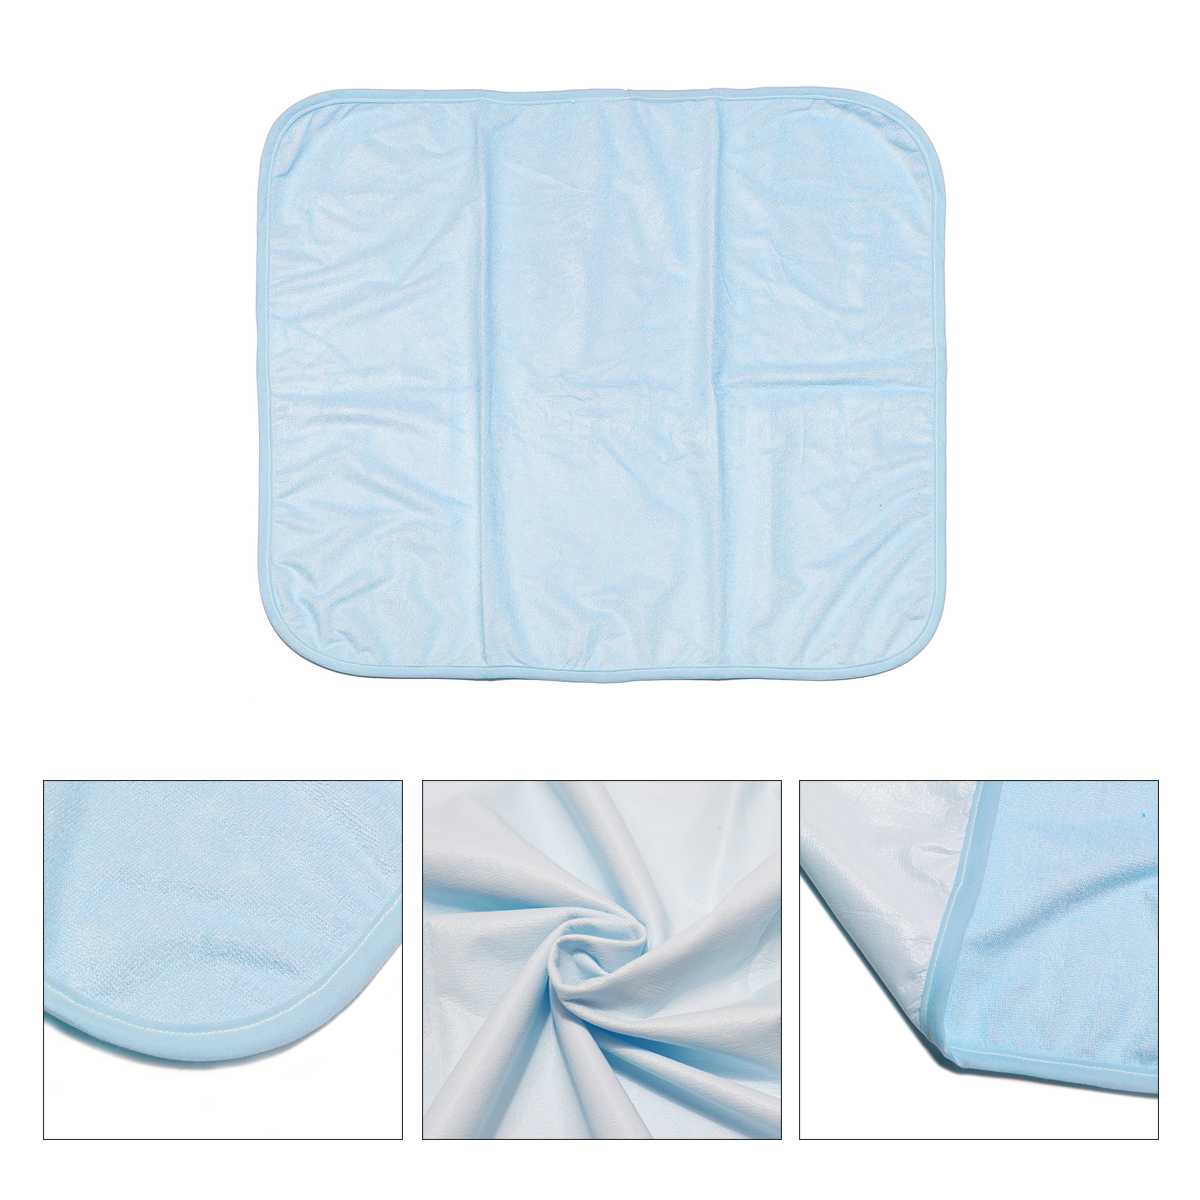 Washable Child Kids Elder Waterproof Washable Reusable Bed Pad Incontinence Bed Wetting Mattress Cover Protect 3 Colors 7 Sizes